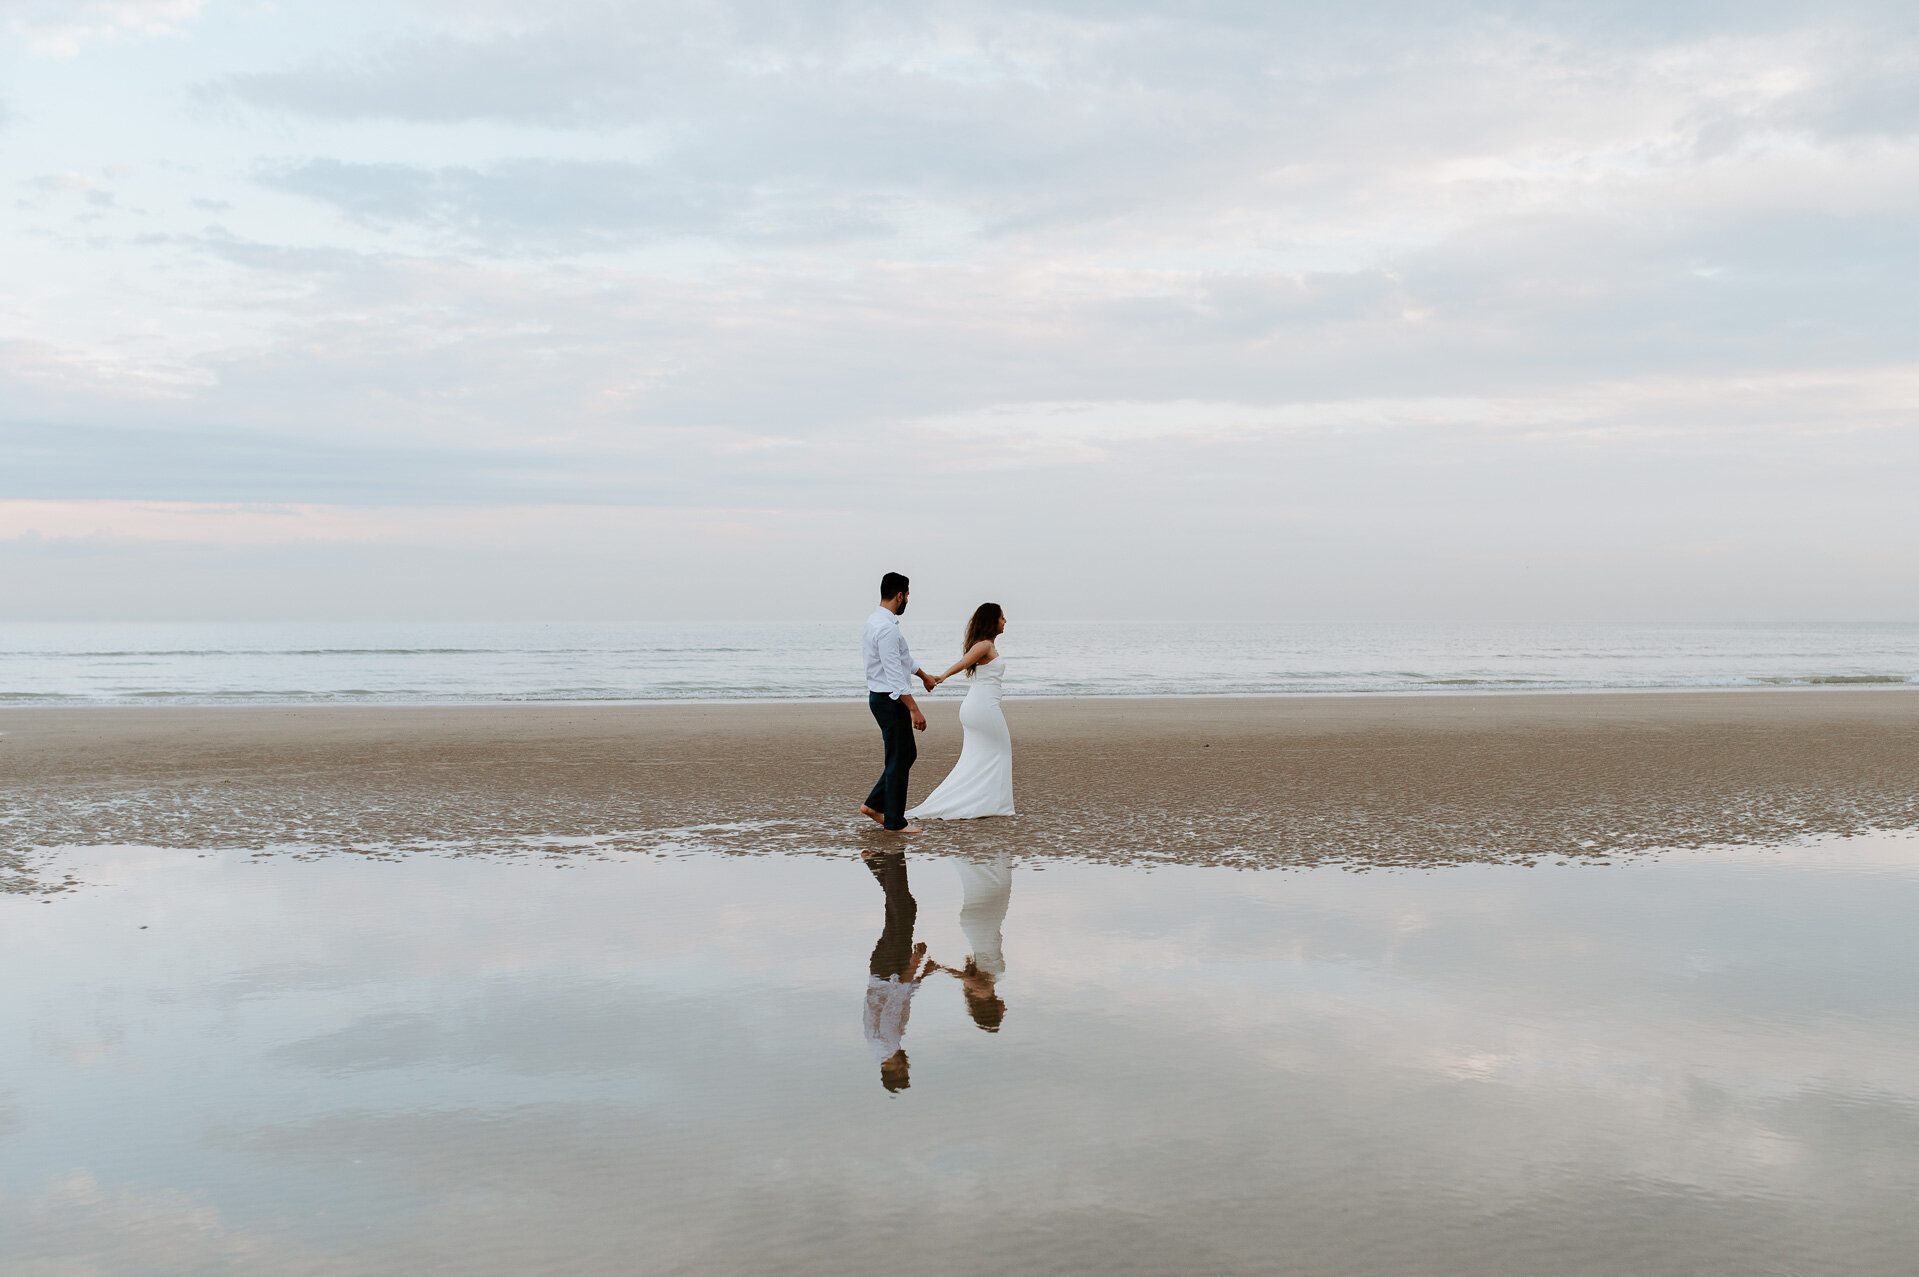 Demiana and Goergeuos - Camber Sands Golden Hour Beach Shoot - Laura Williams Photography-22.jpg